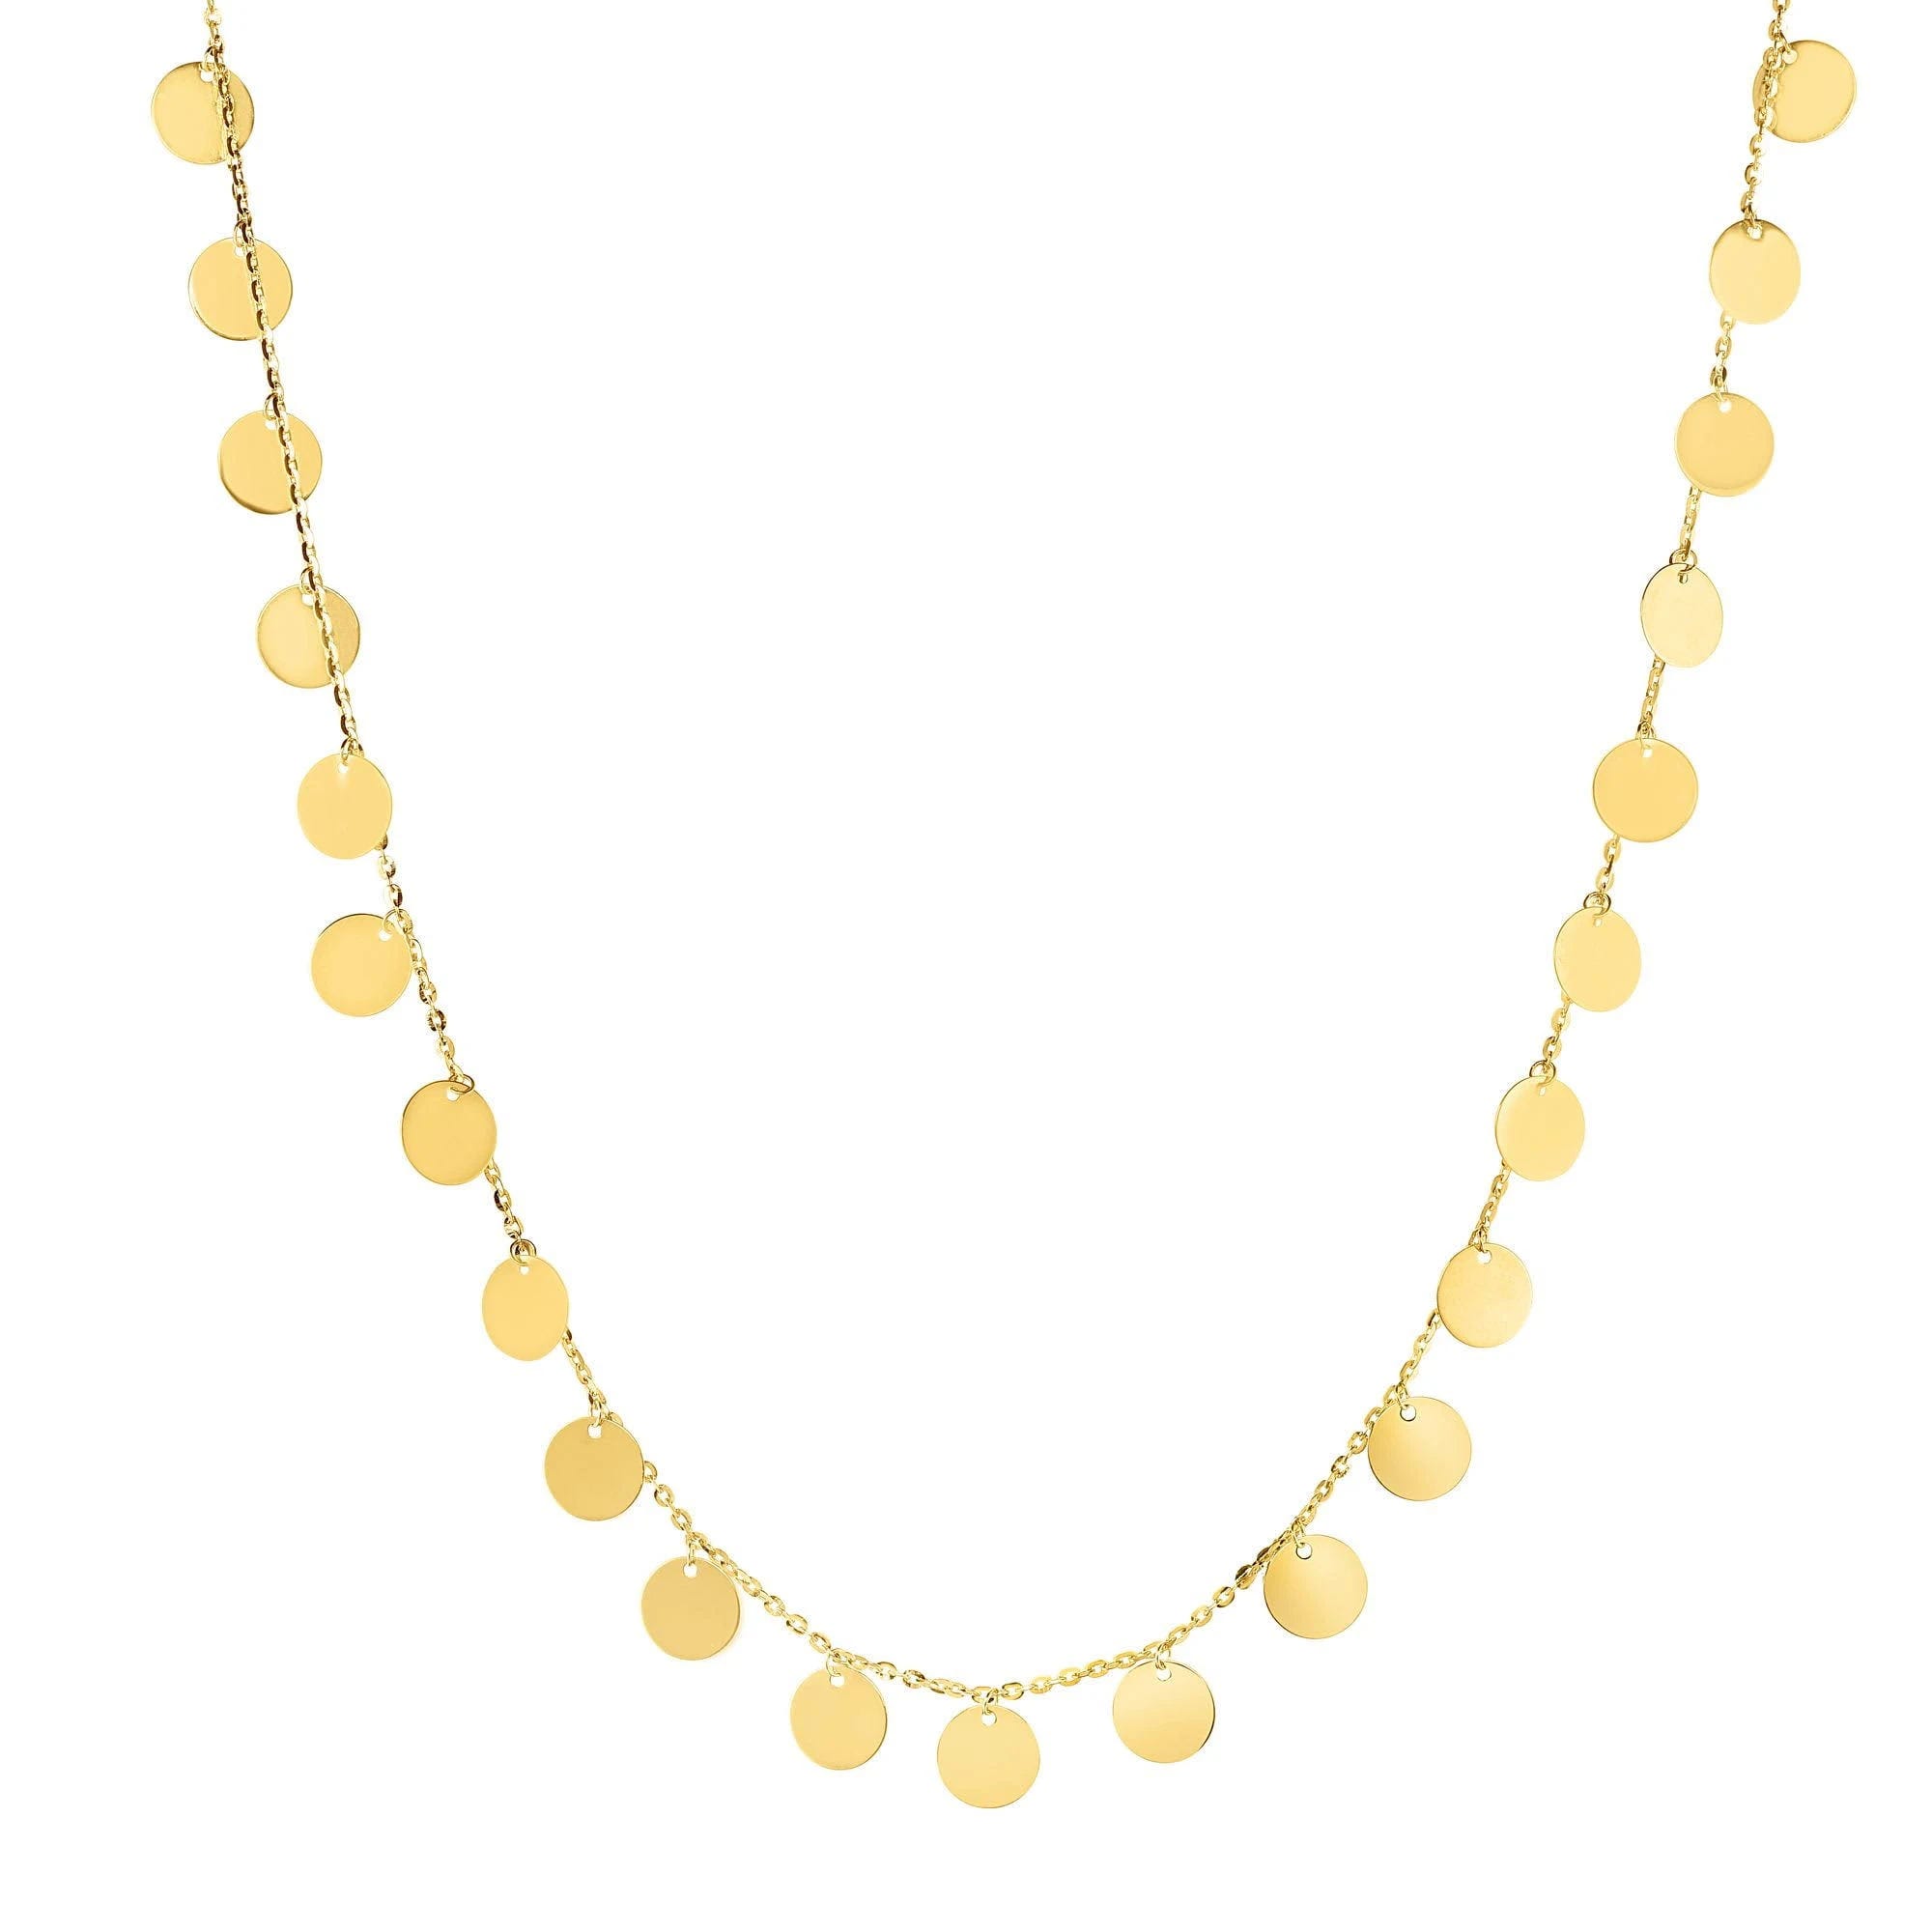 Elegant 14k Yellow Gold Choker Necklace for Ultimate Style | Image